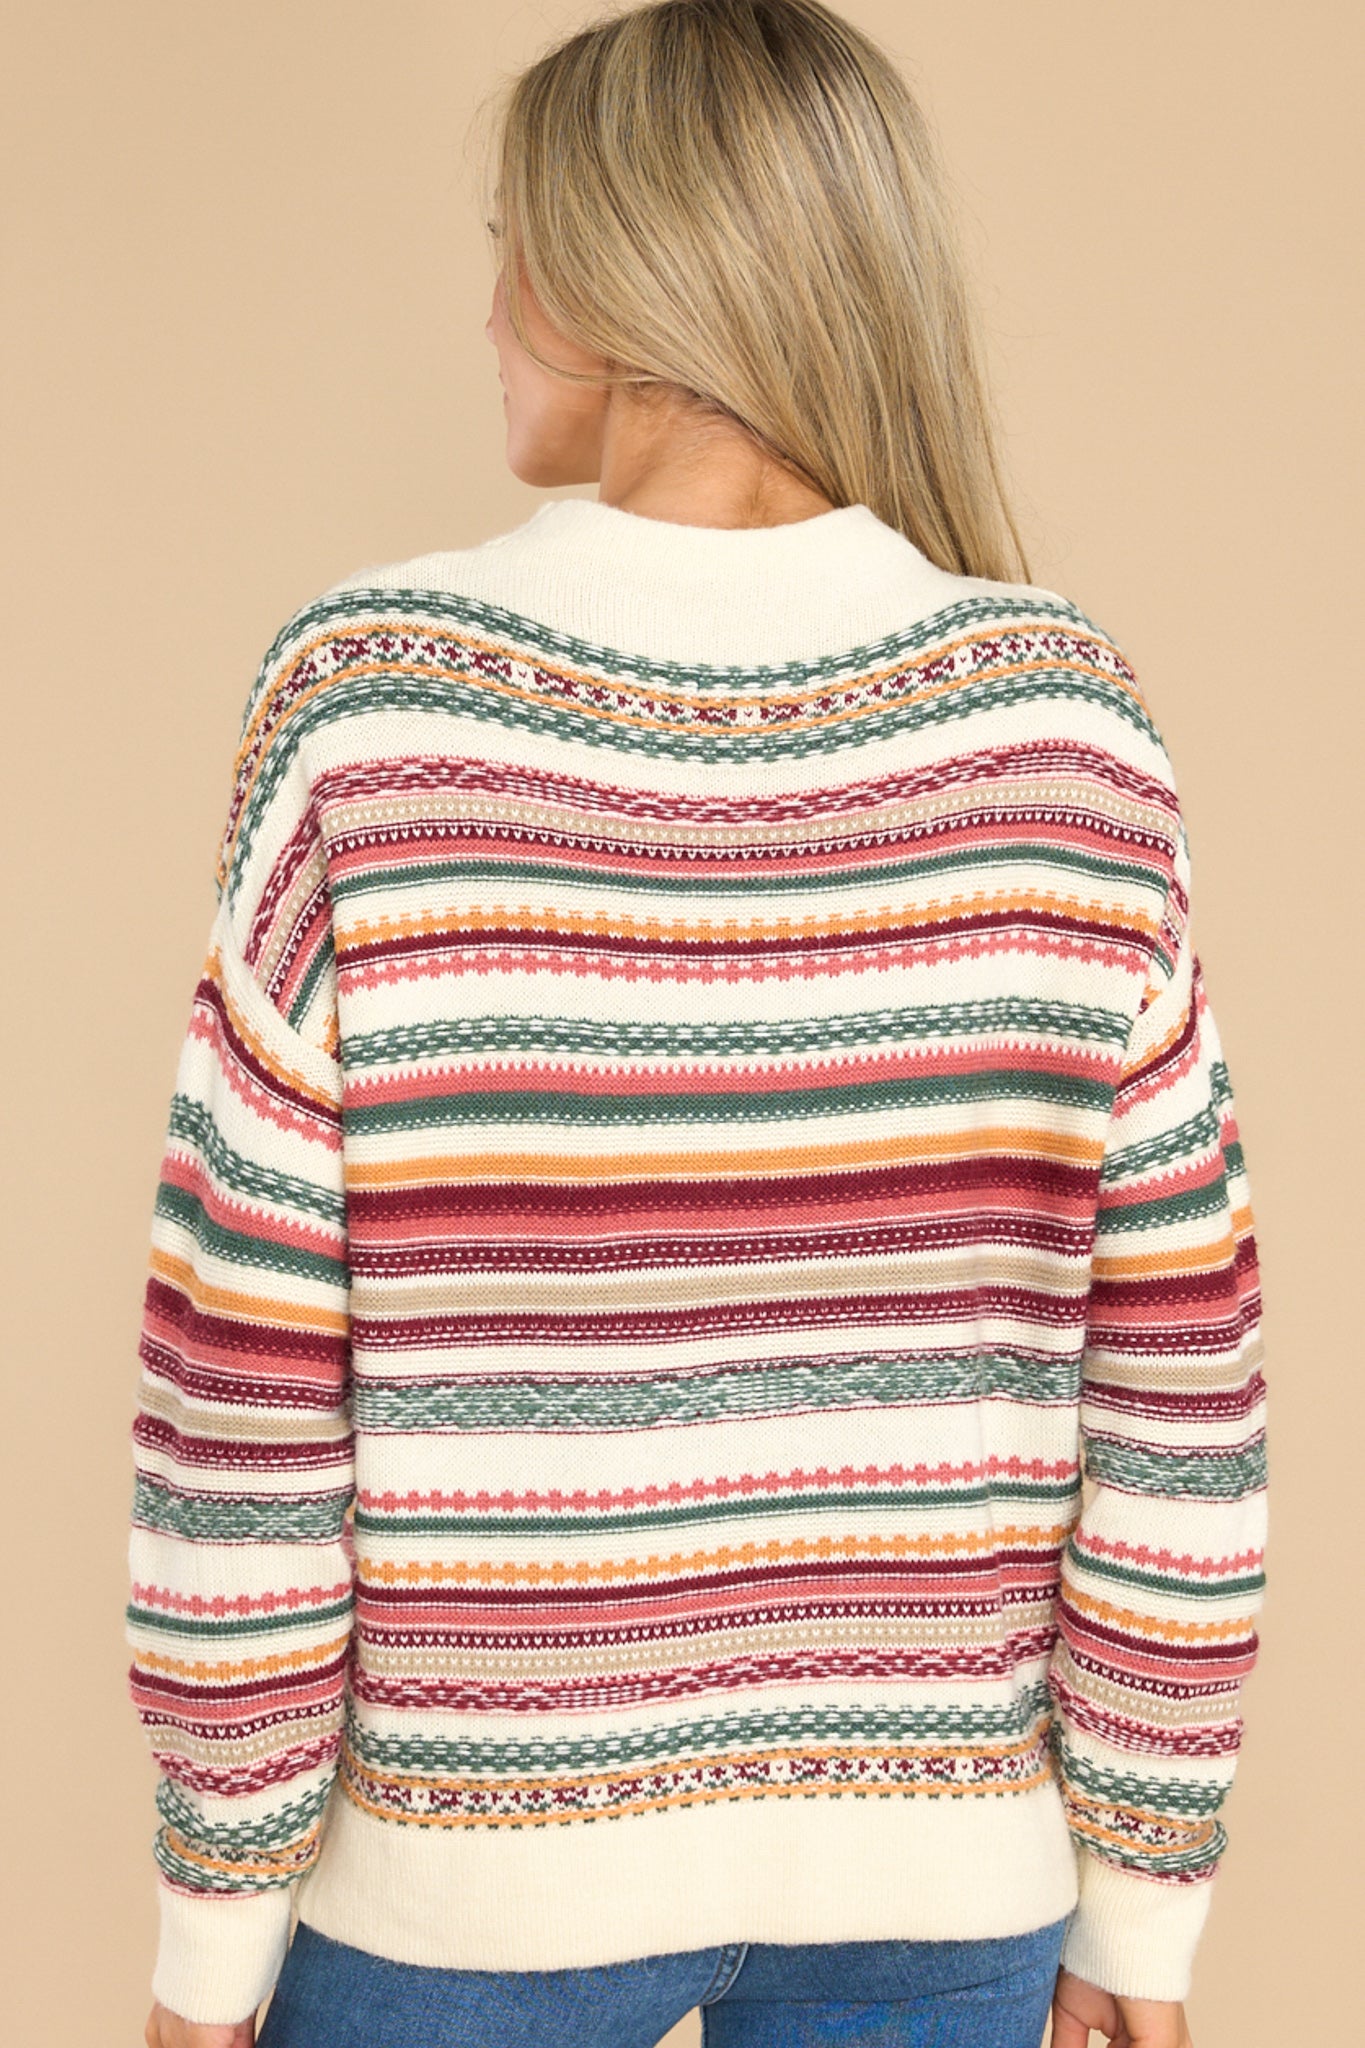 Making Things Happen Burgundy Striped Sweater